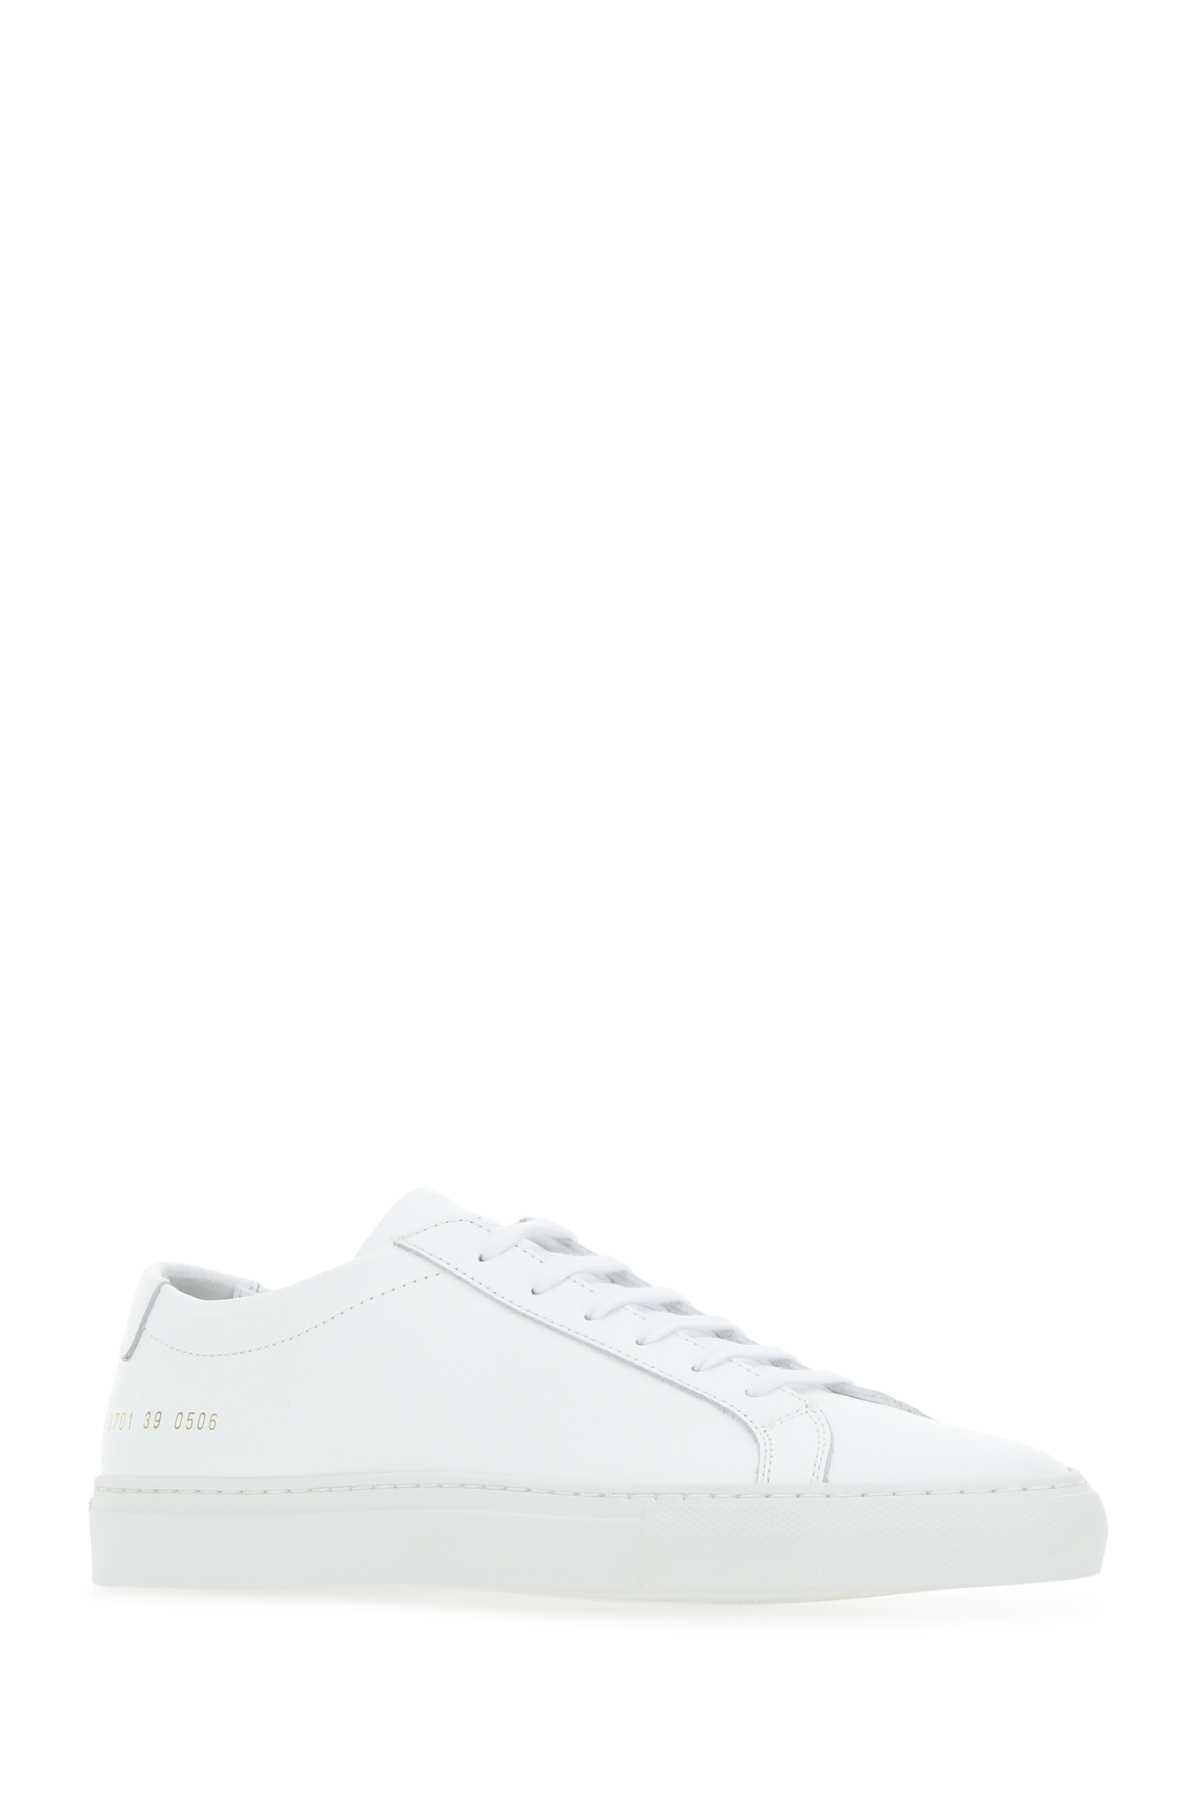 Shop Common Projects White Leather Original Achilles Sneakers In 0506